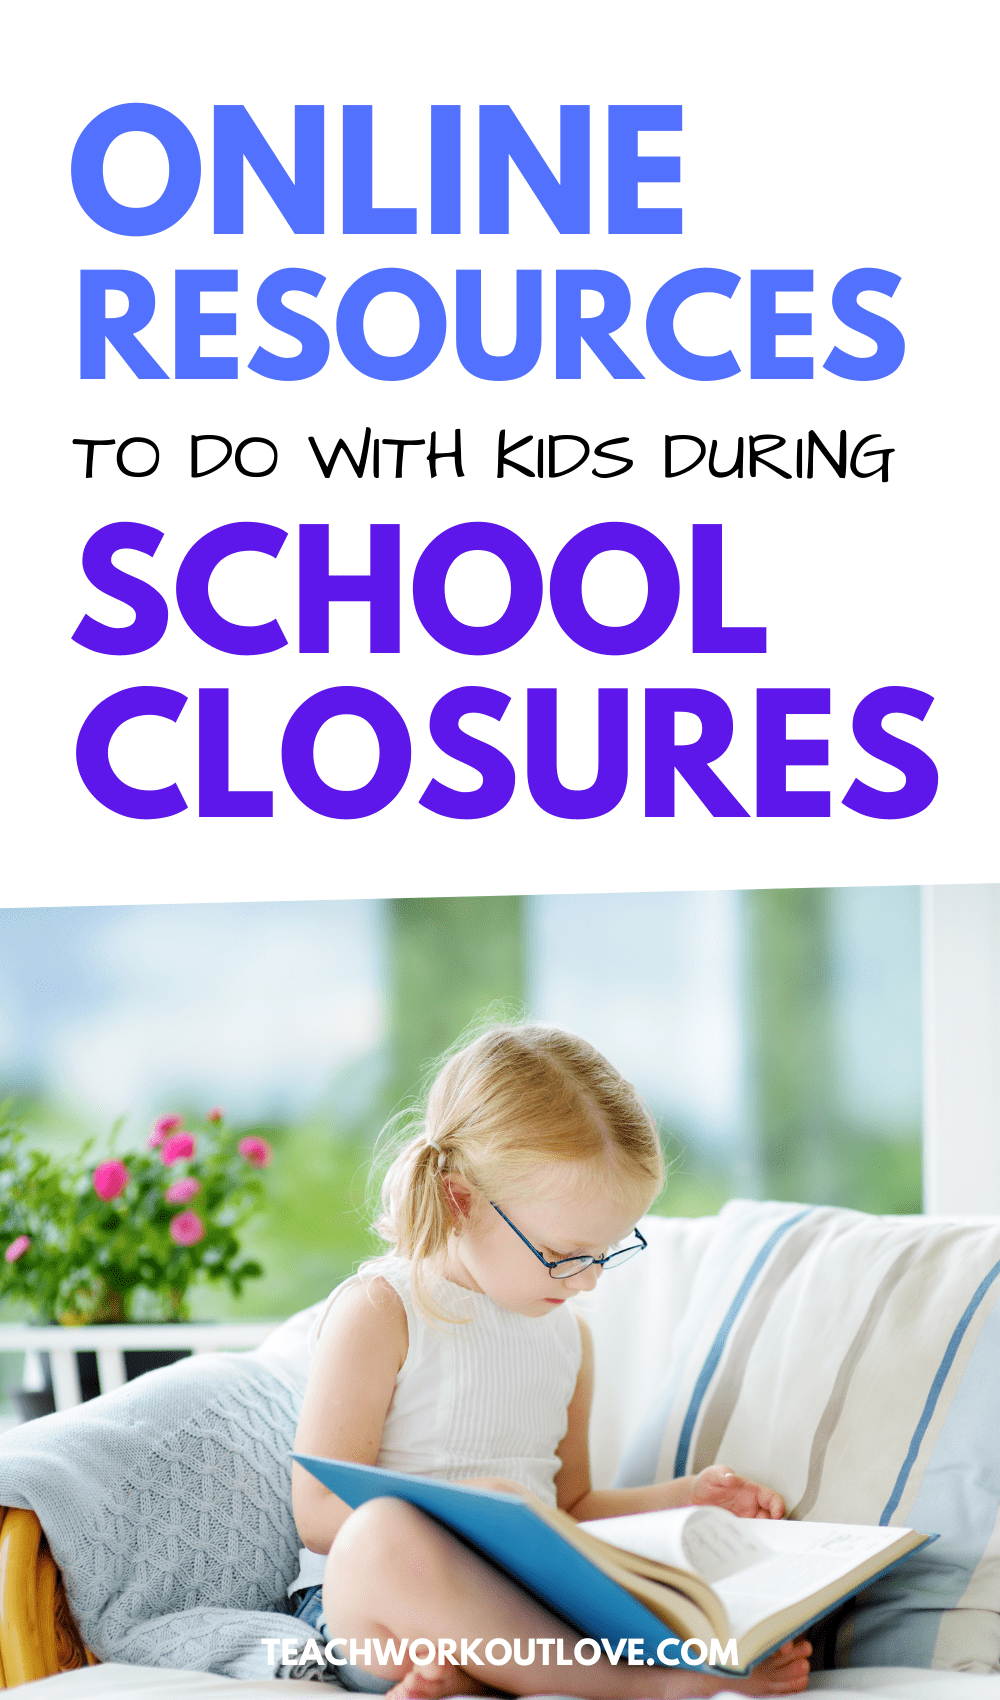 Is your kid's school closed? We created lists of activities & resources for families dealing with school closures + printable daily schedule.